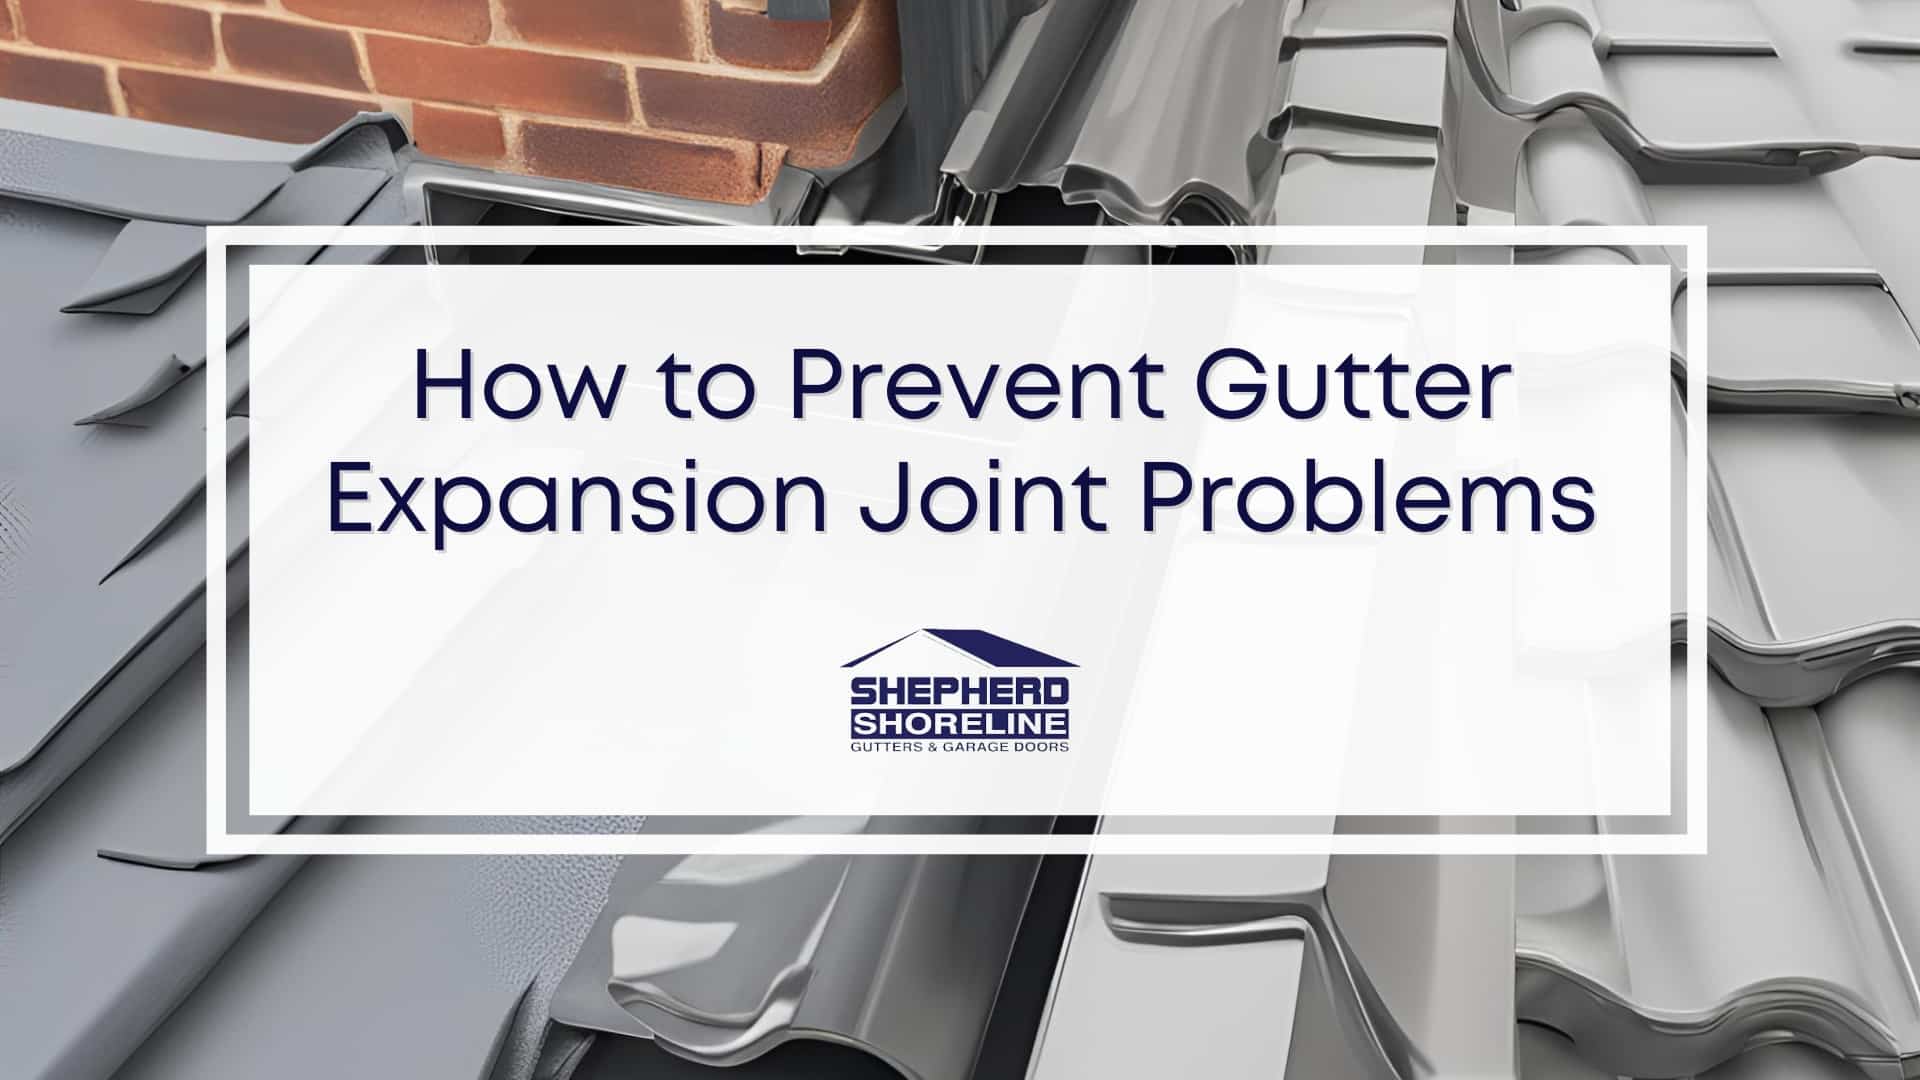 Featured image of how to prevent gutter expansion joint problems